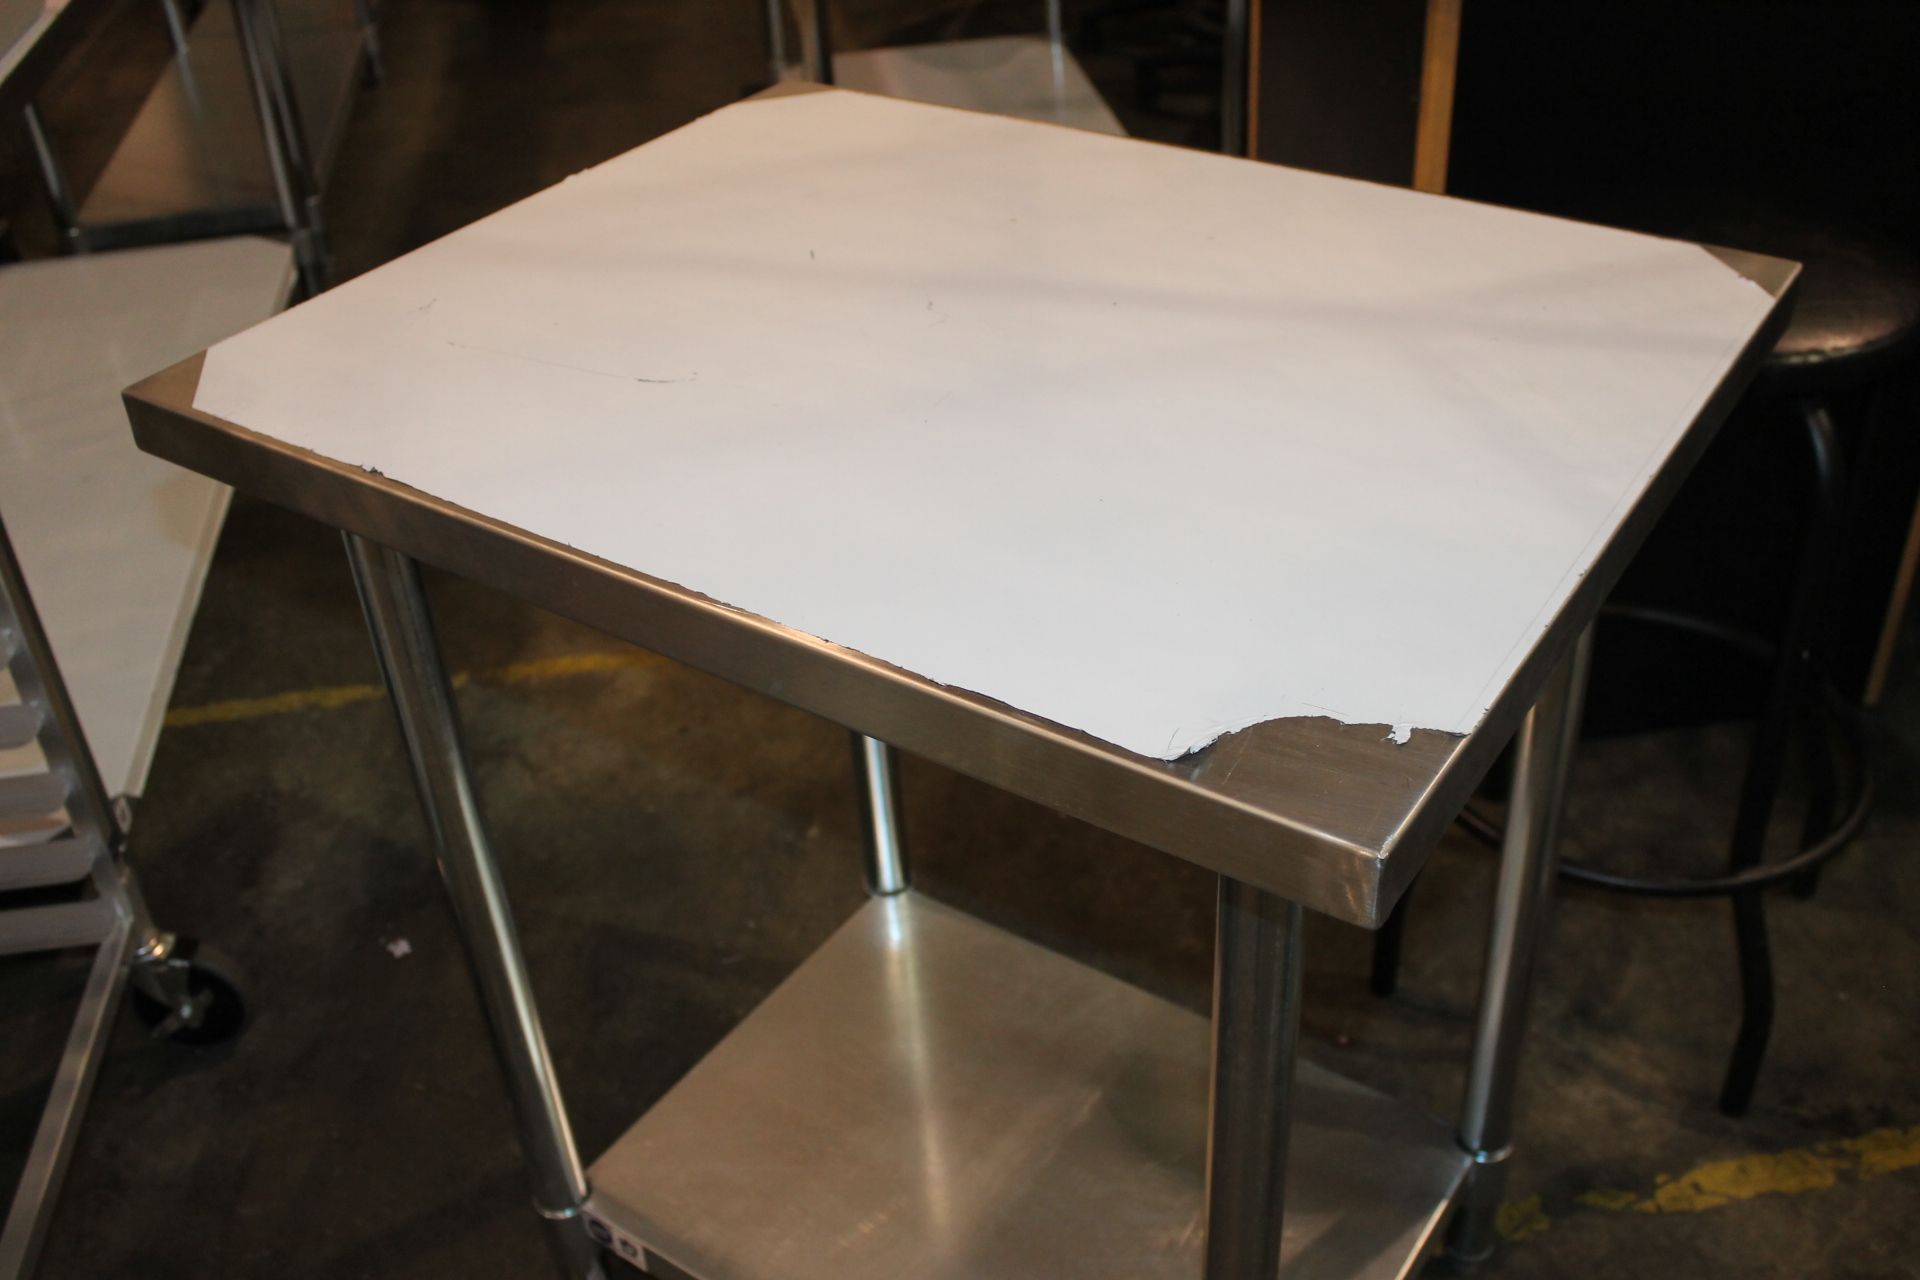 Work Table, 30"W x 24"D, stainless steel